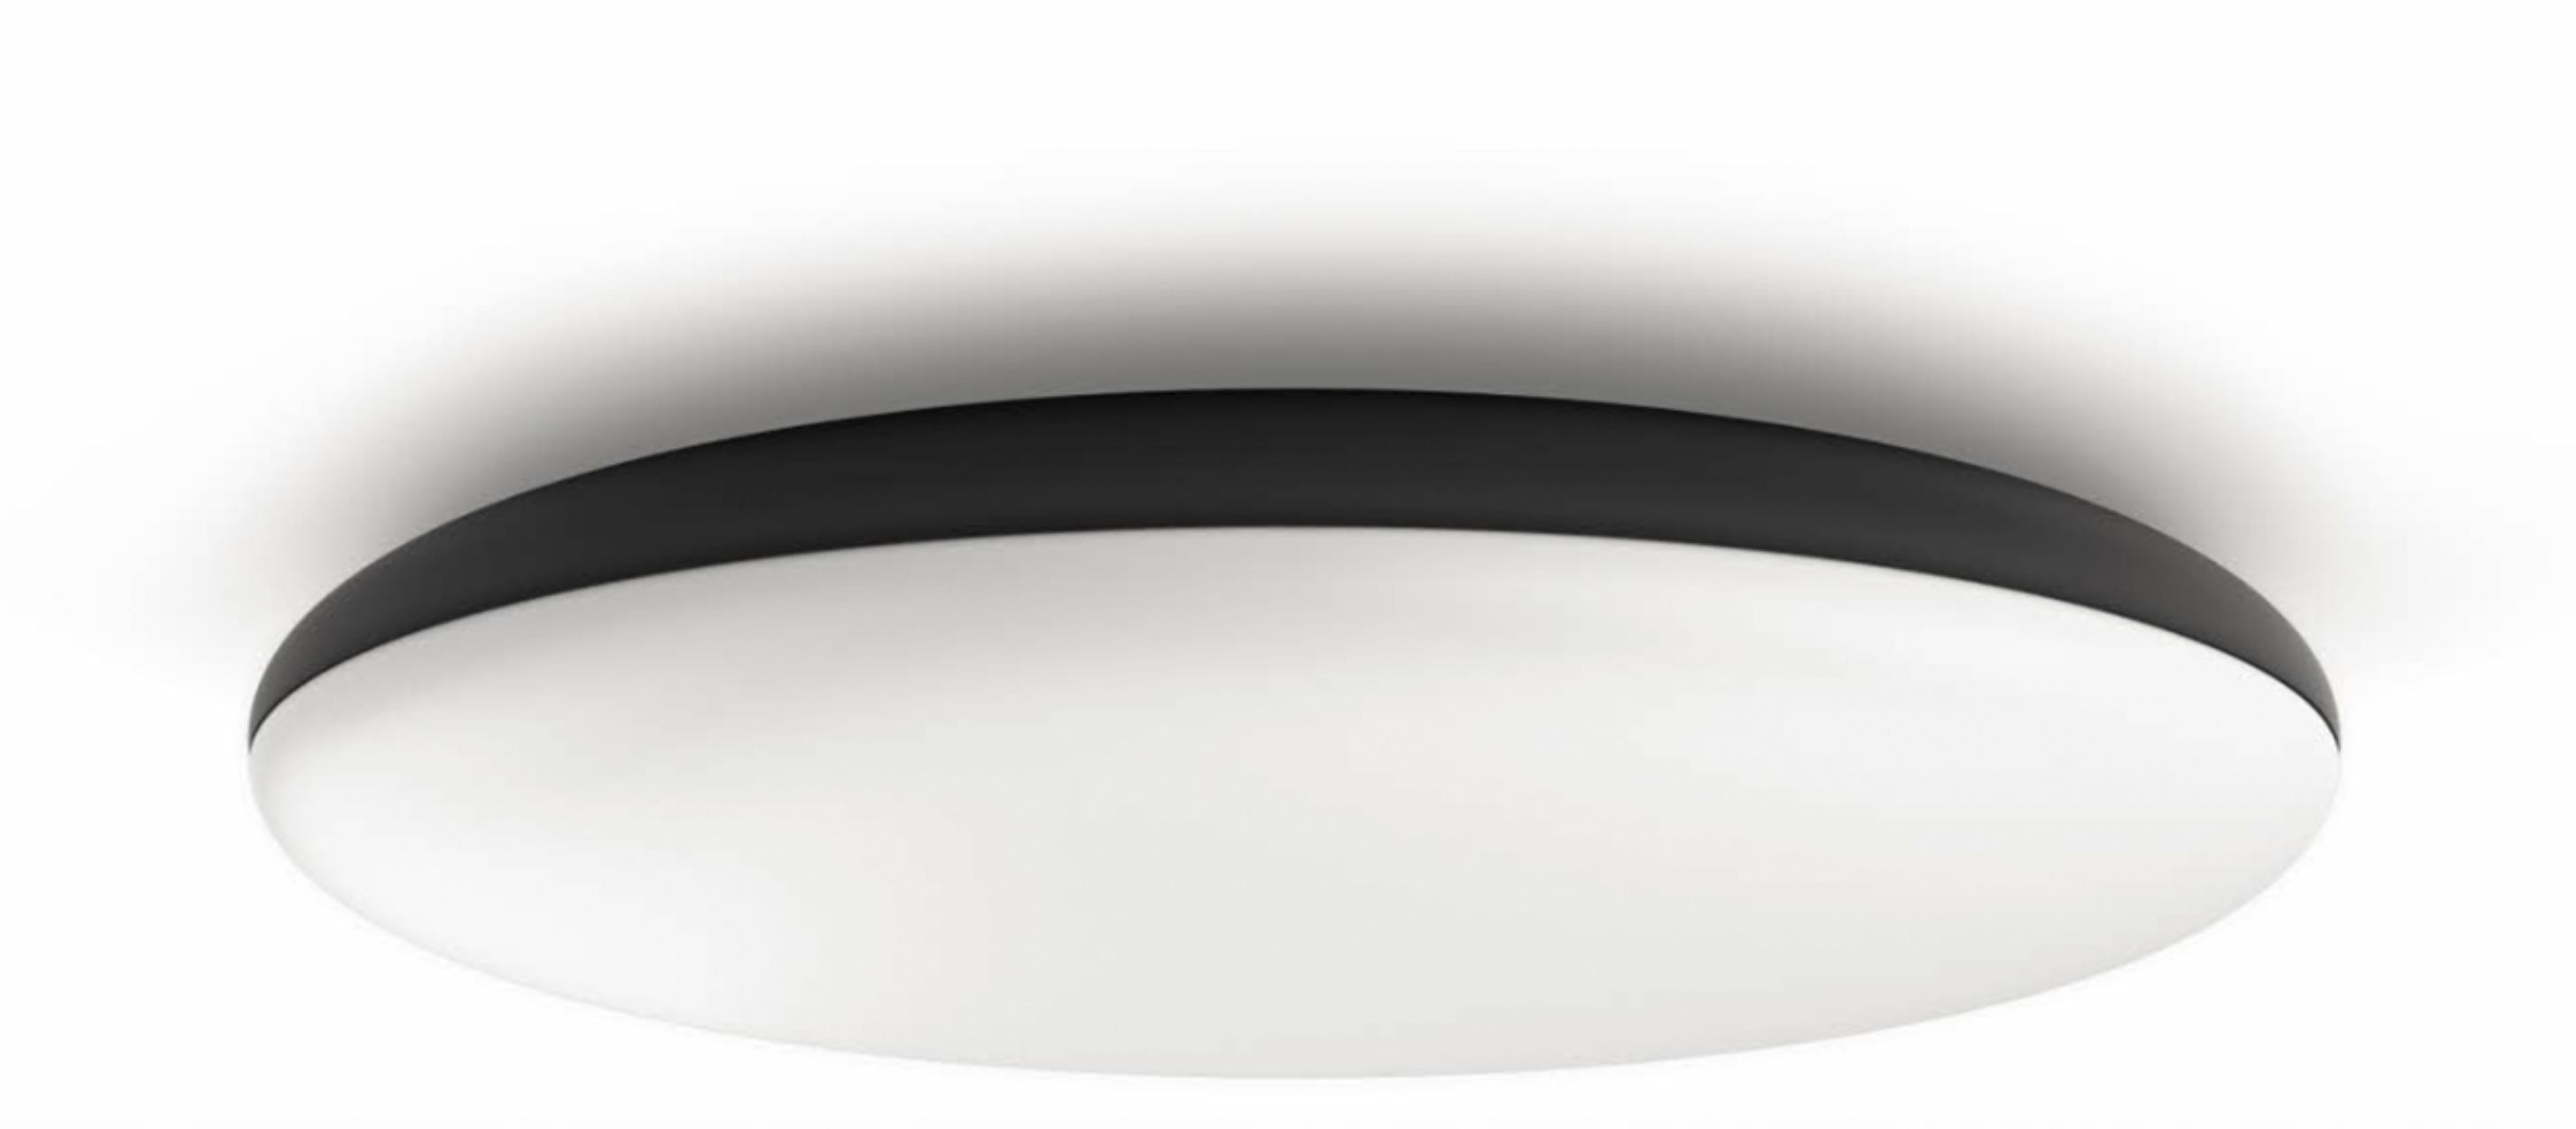 Left View: Philips - Hue White and Color Ambiance Lucca Wall Light - Black